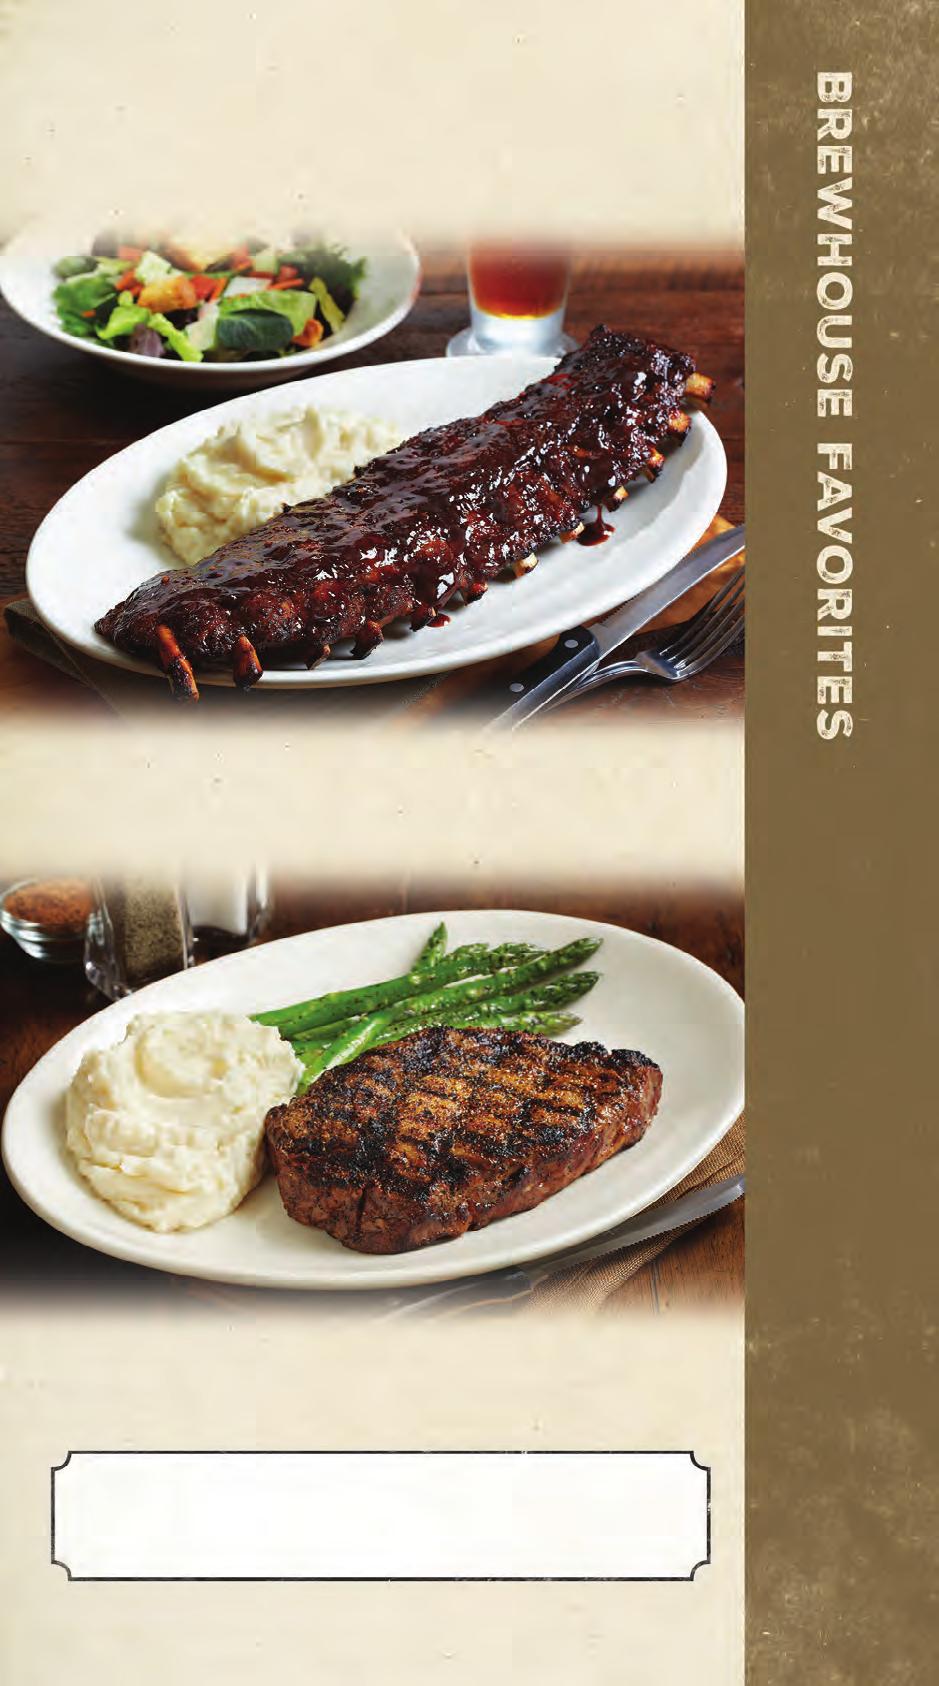 RIBS AND STEAKS Our flame-grilled steaks are hand-cut, aged for at least 28 days and seasoned with Big Poppa Smokers Double Secret Steak Rub. Served with any two housemade sides.